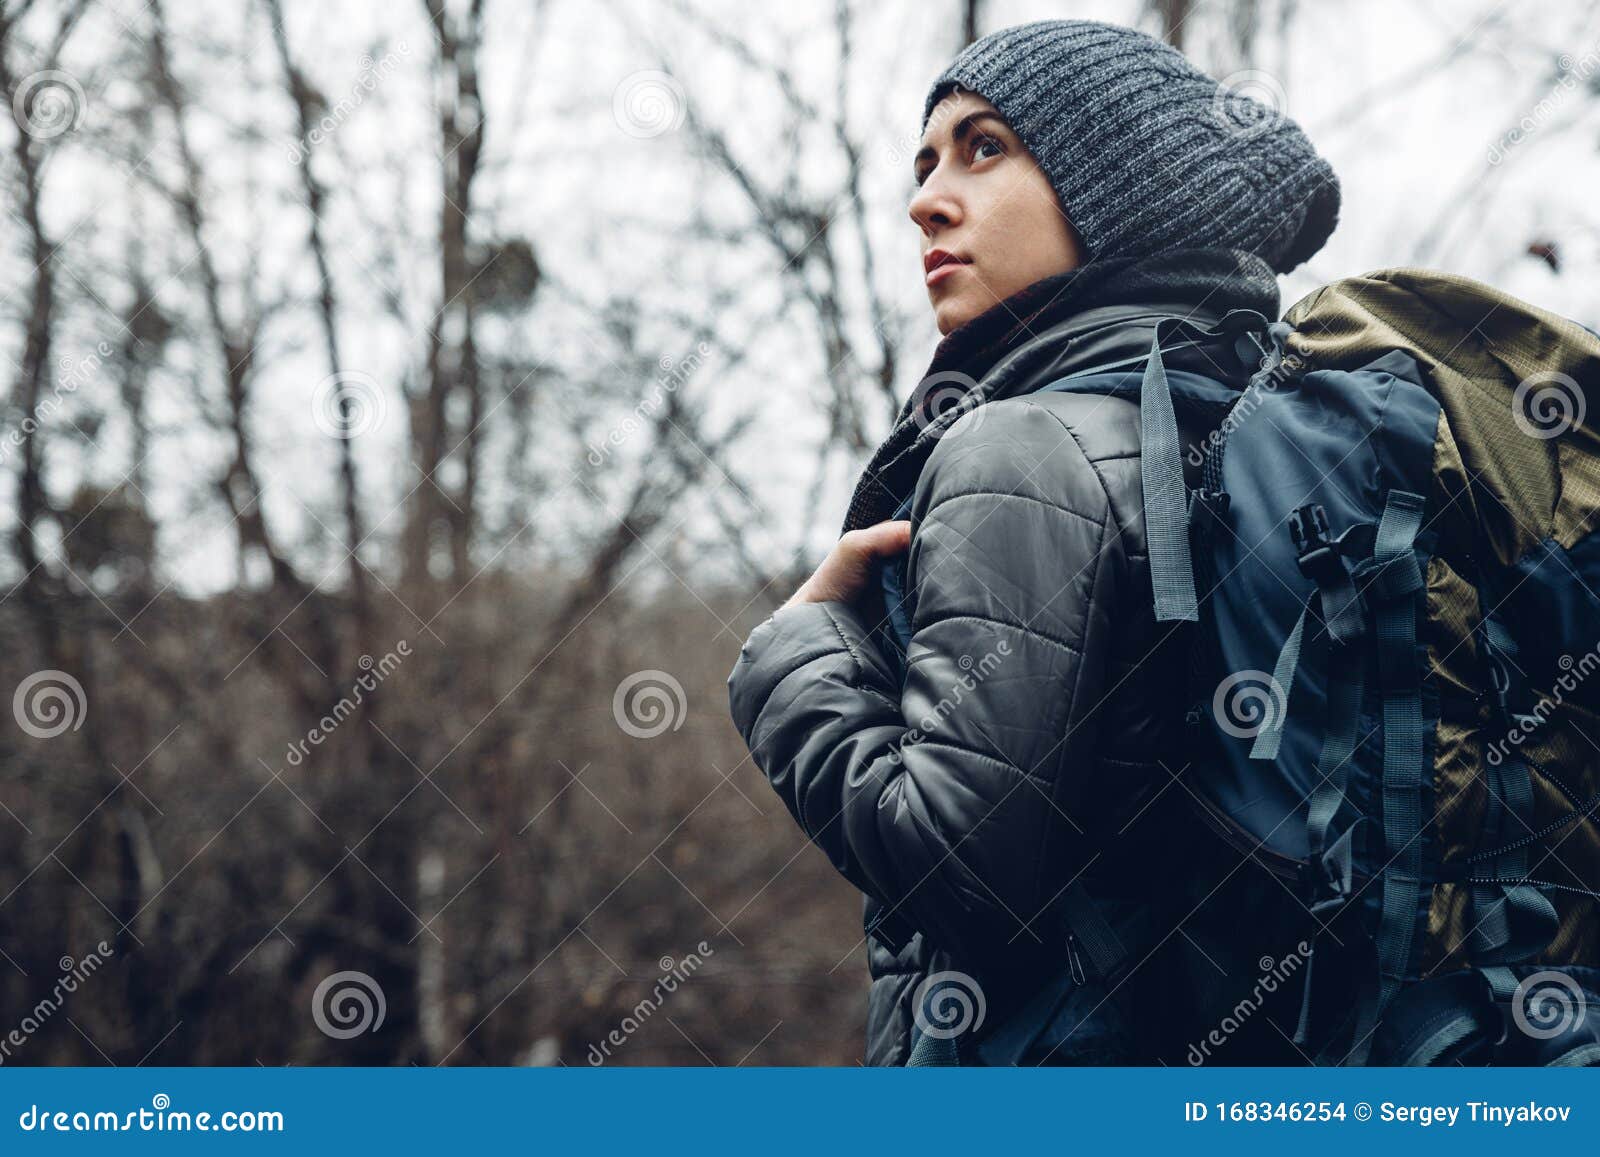 explorer young woman with backpack walking in forest, rear view. adventure bushcraft survival scouting